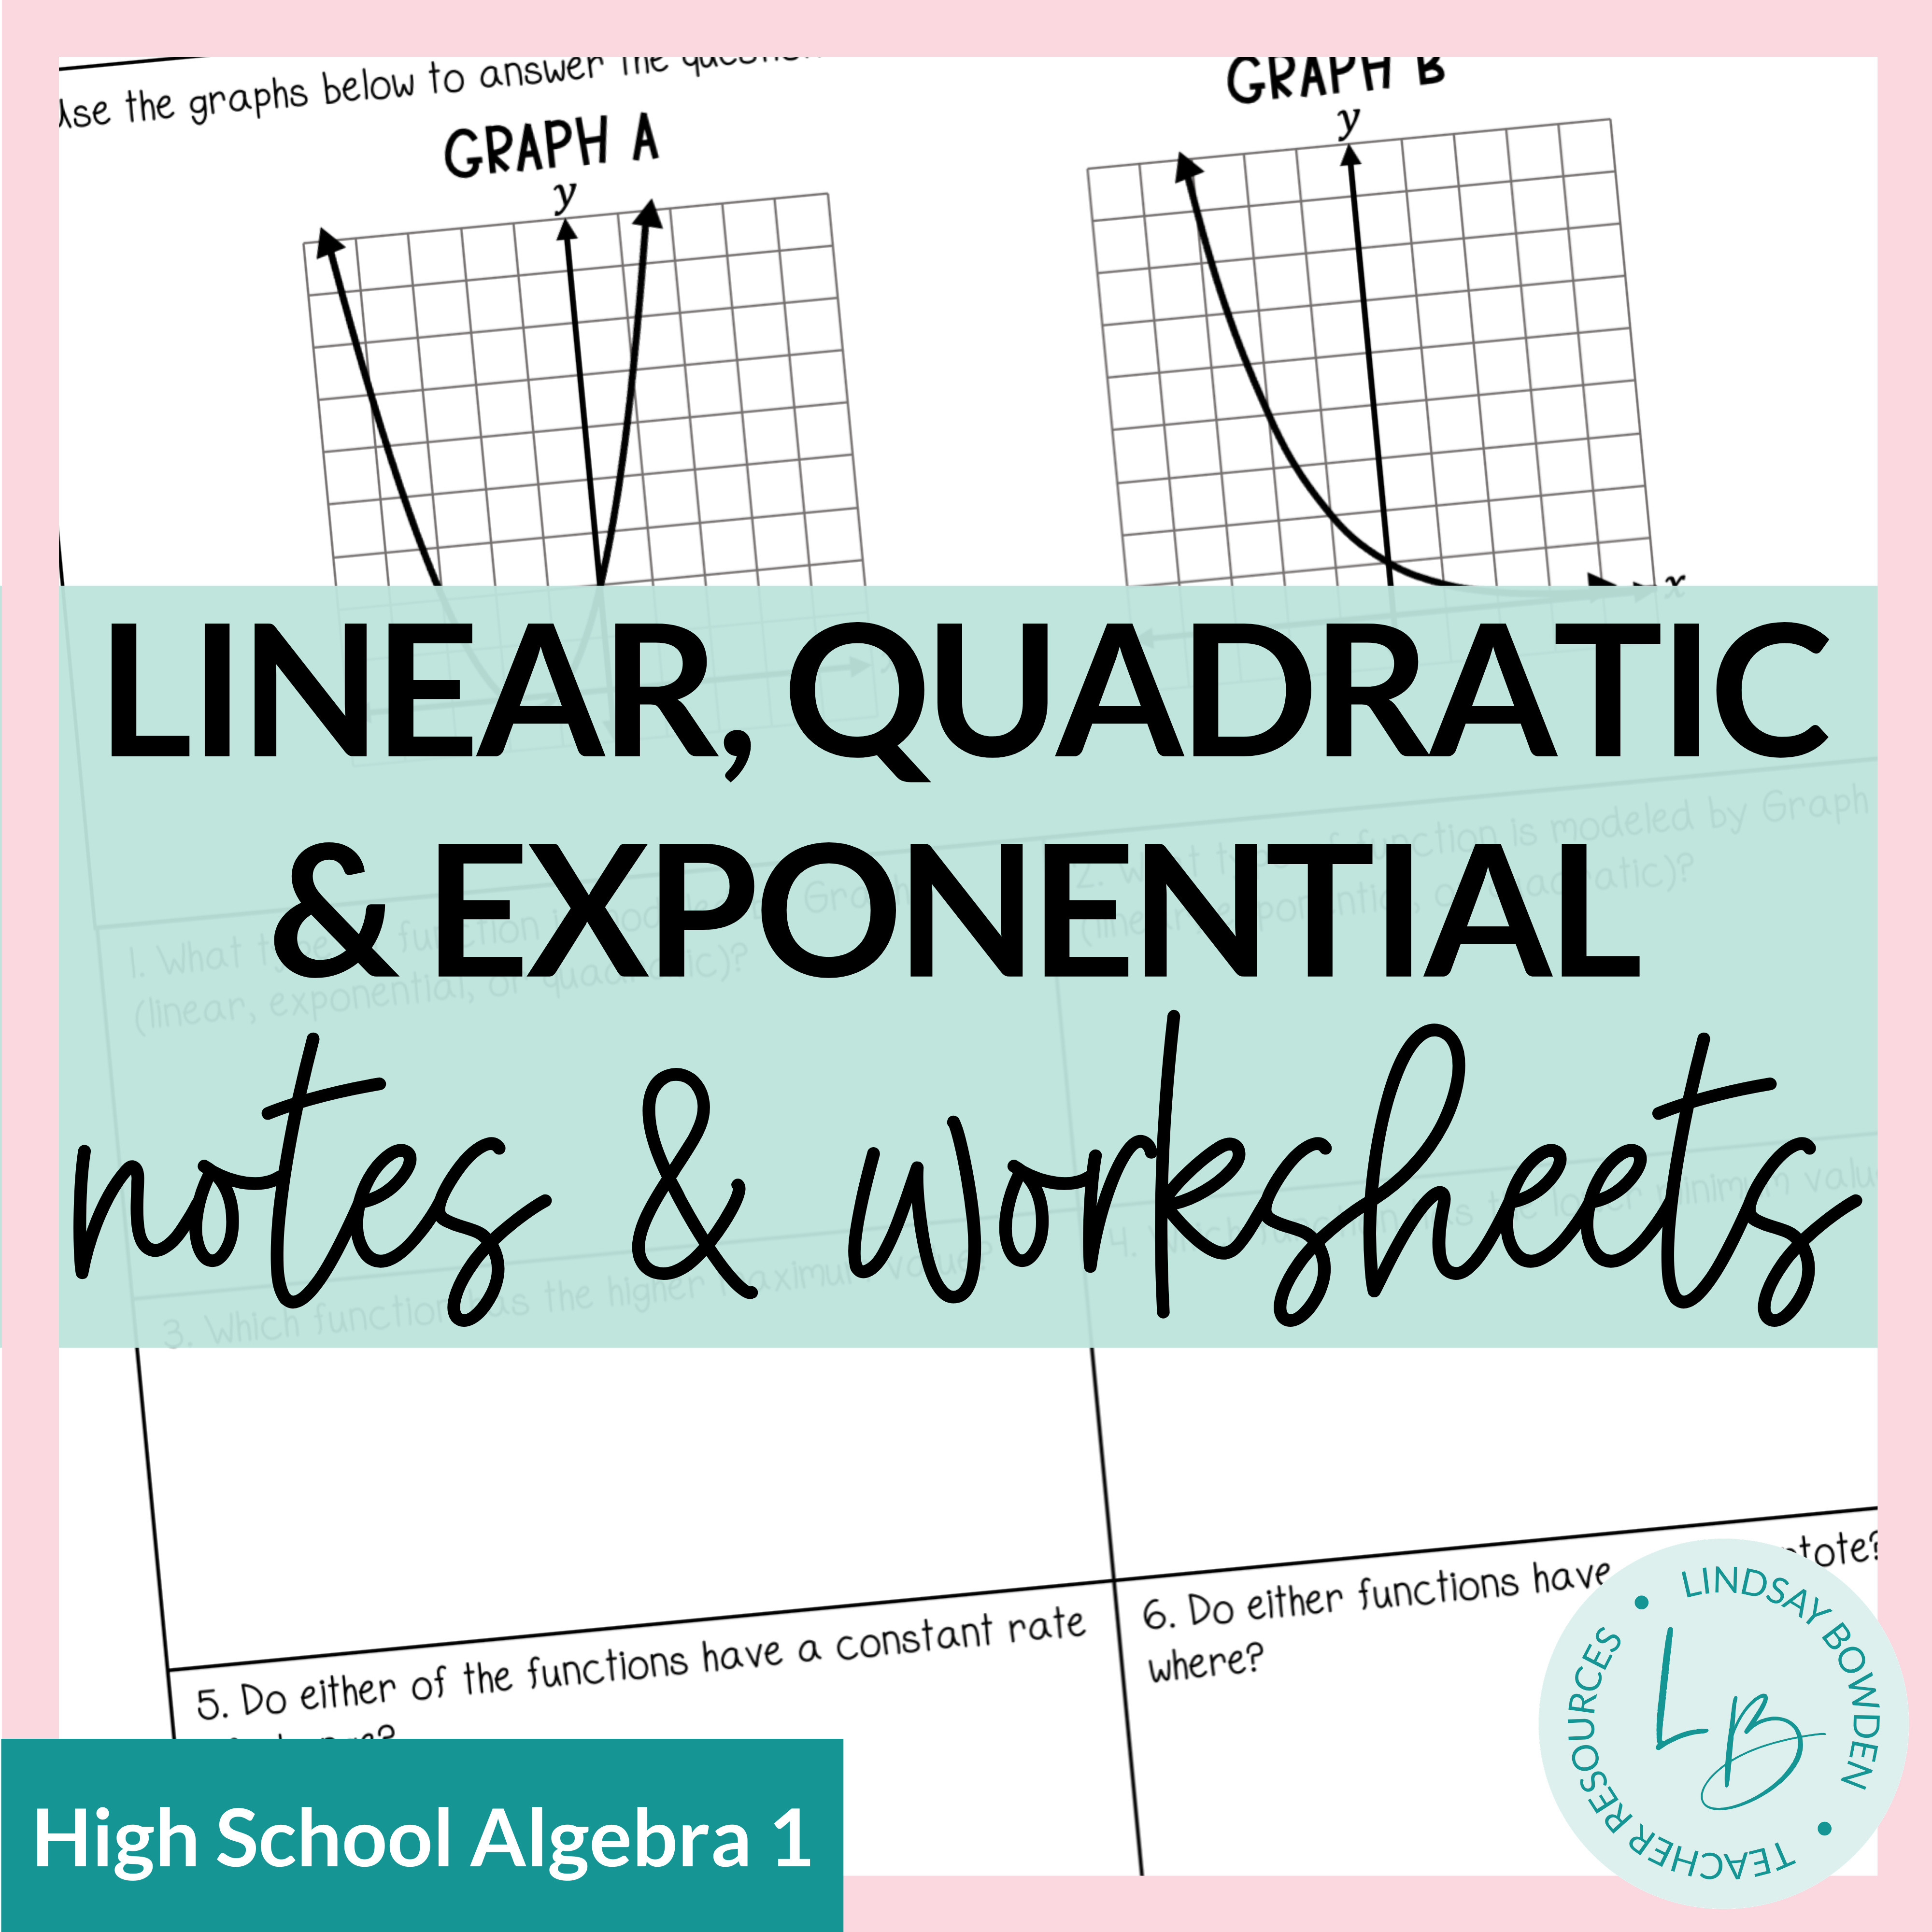 Linear, Quadratic, Exponential Notes and Worksheets - Lindsay Bowden Throughout From Linear To Quadratic Worksheet